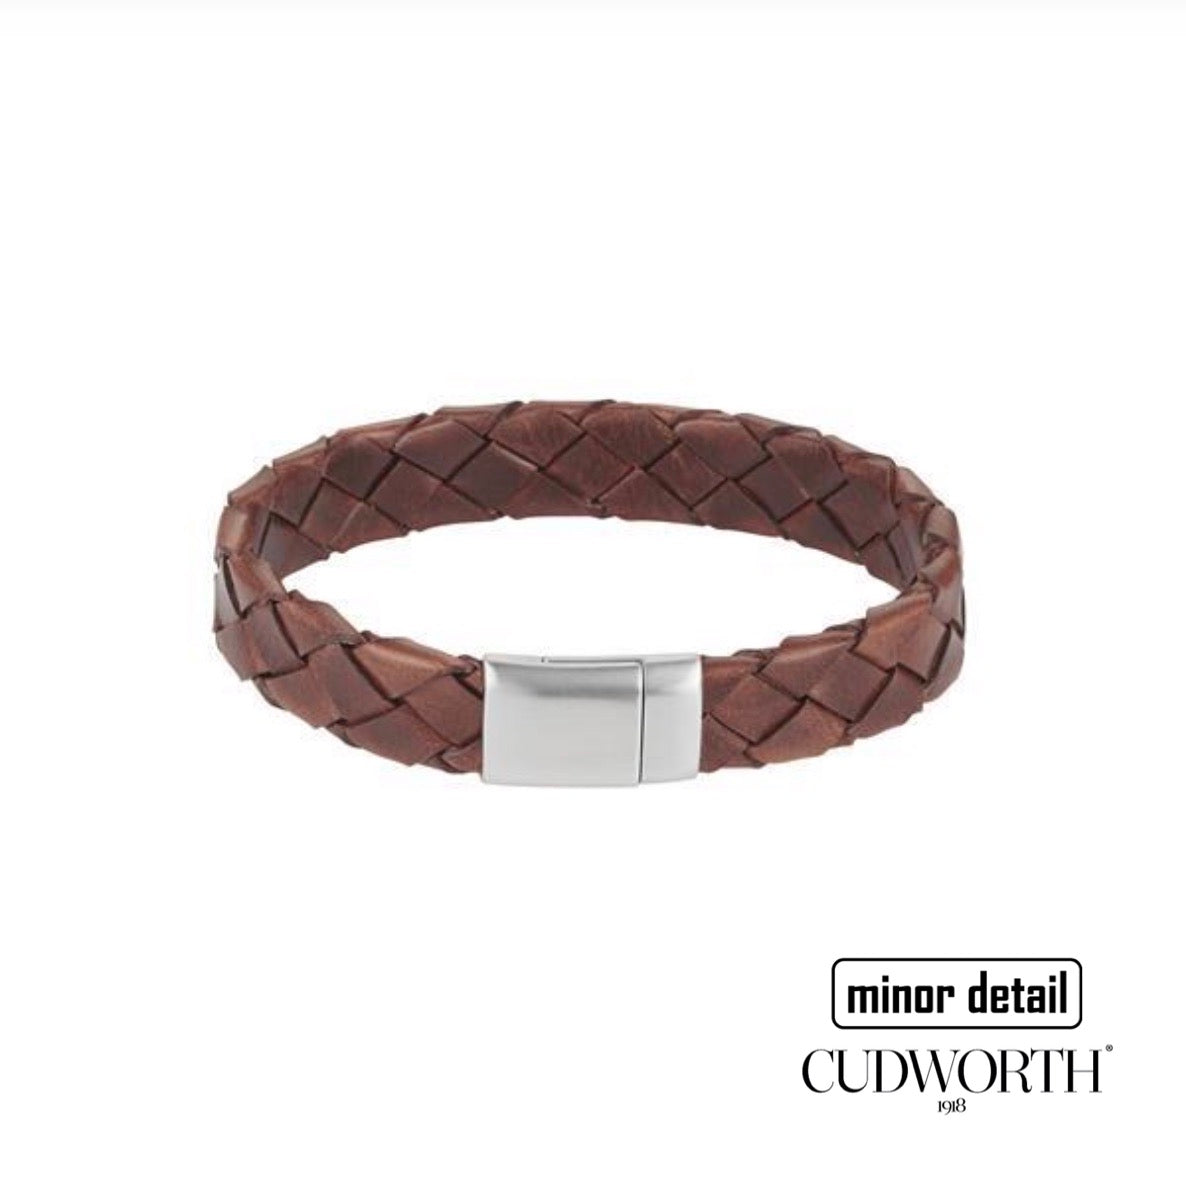 Mens leather bracelet in tobacco brown colour with stainless steel clasp